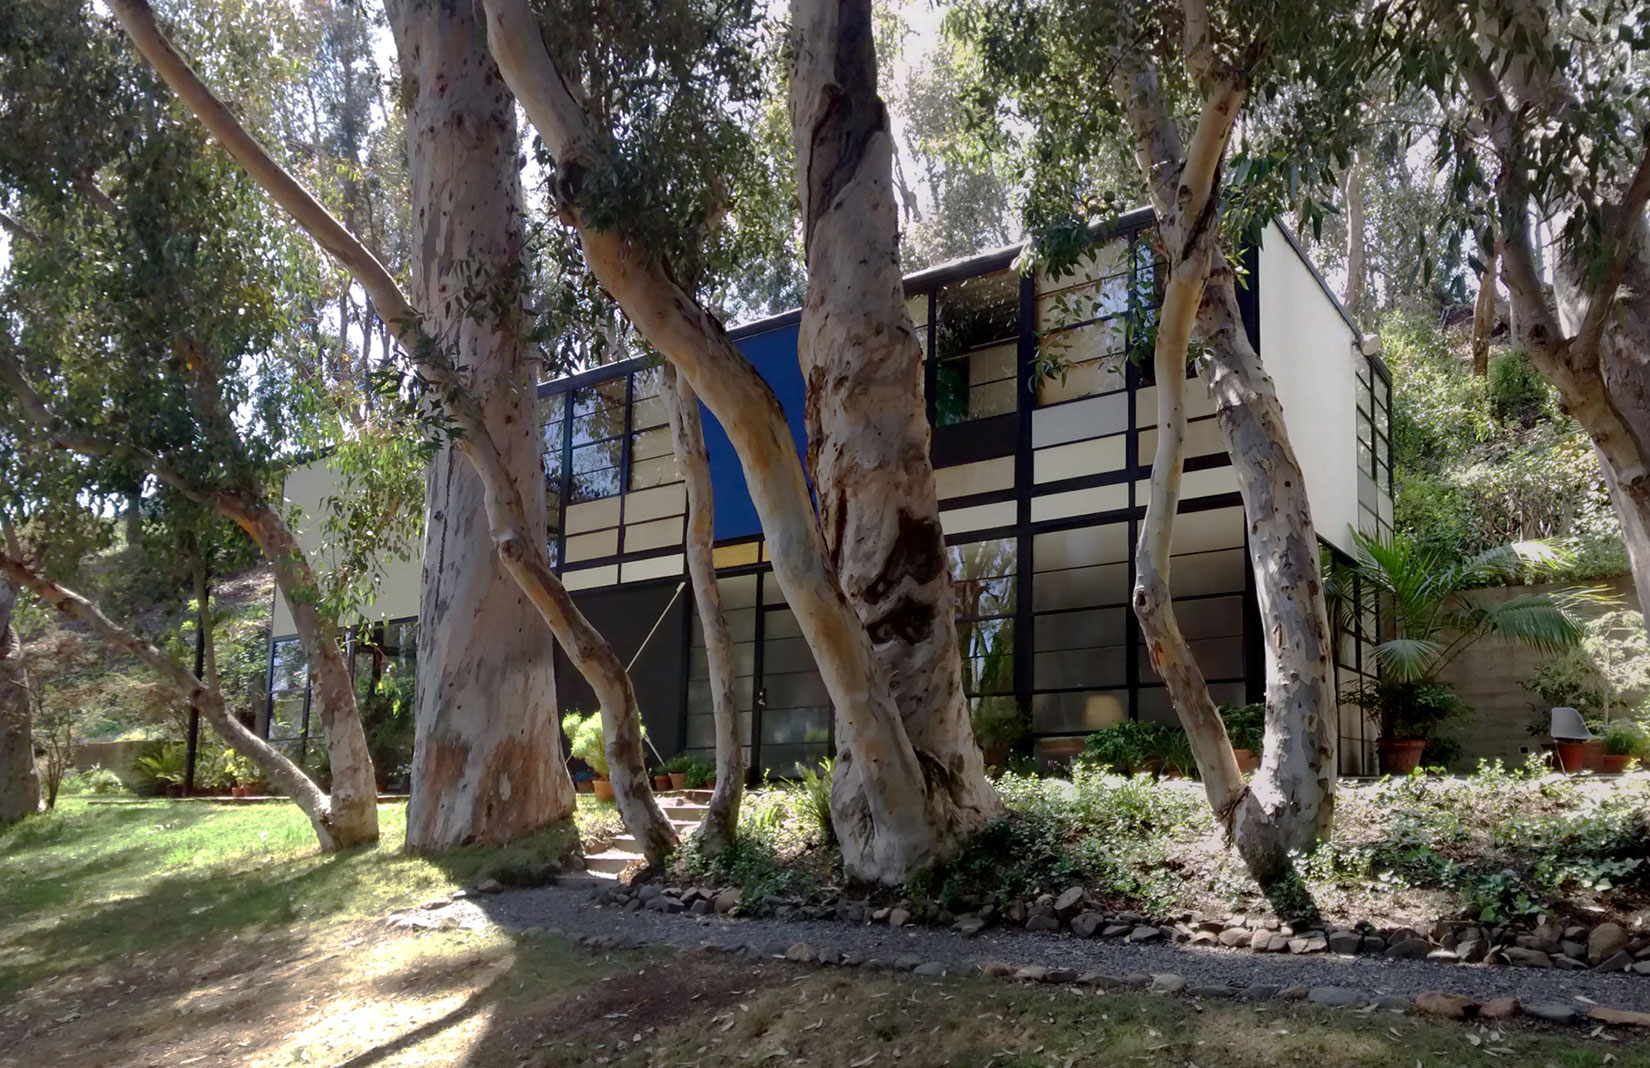 Architects' homes you can visit, including the Eames House